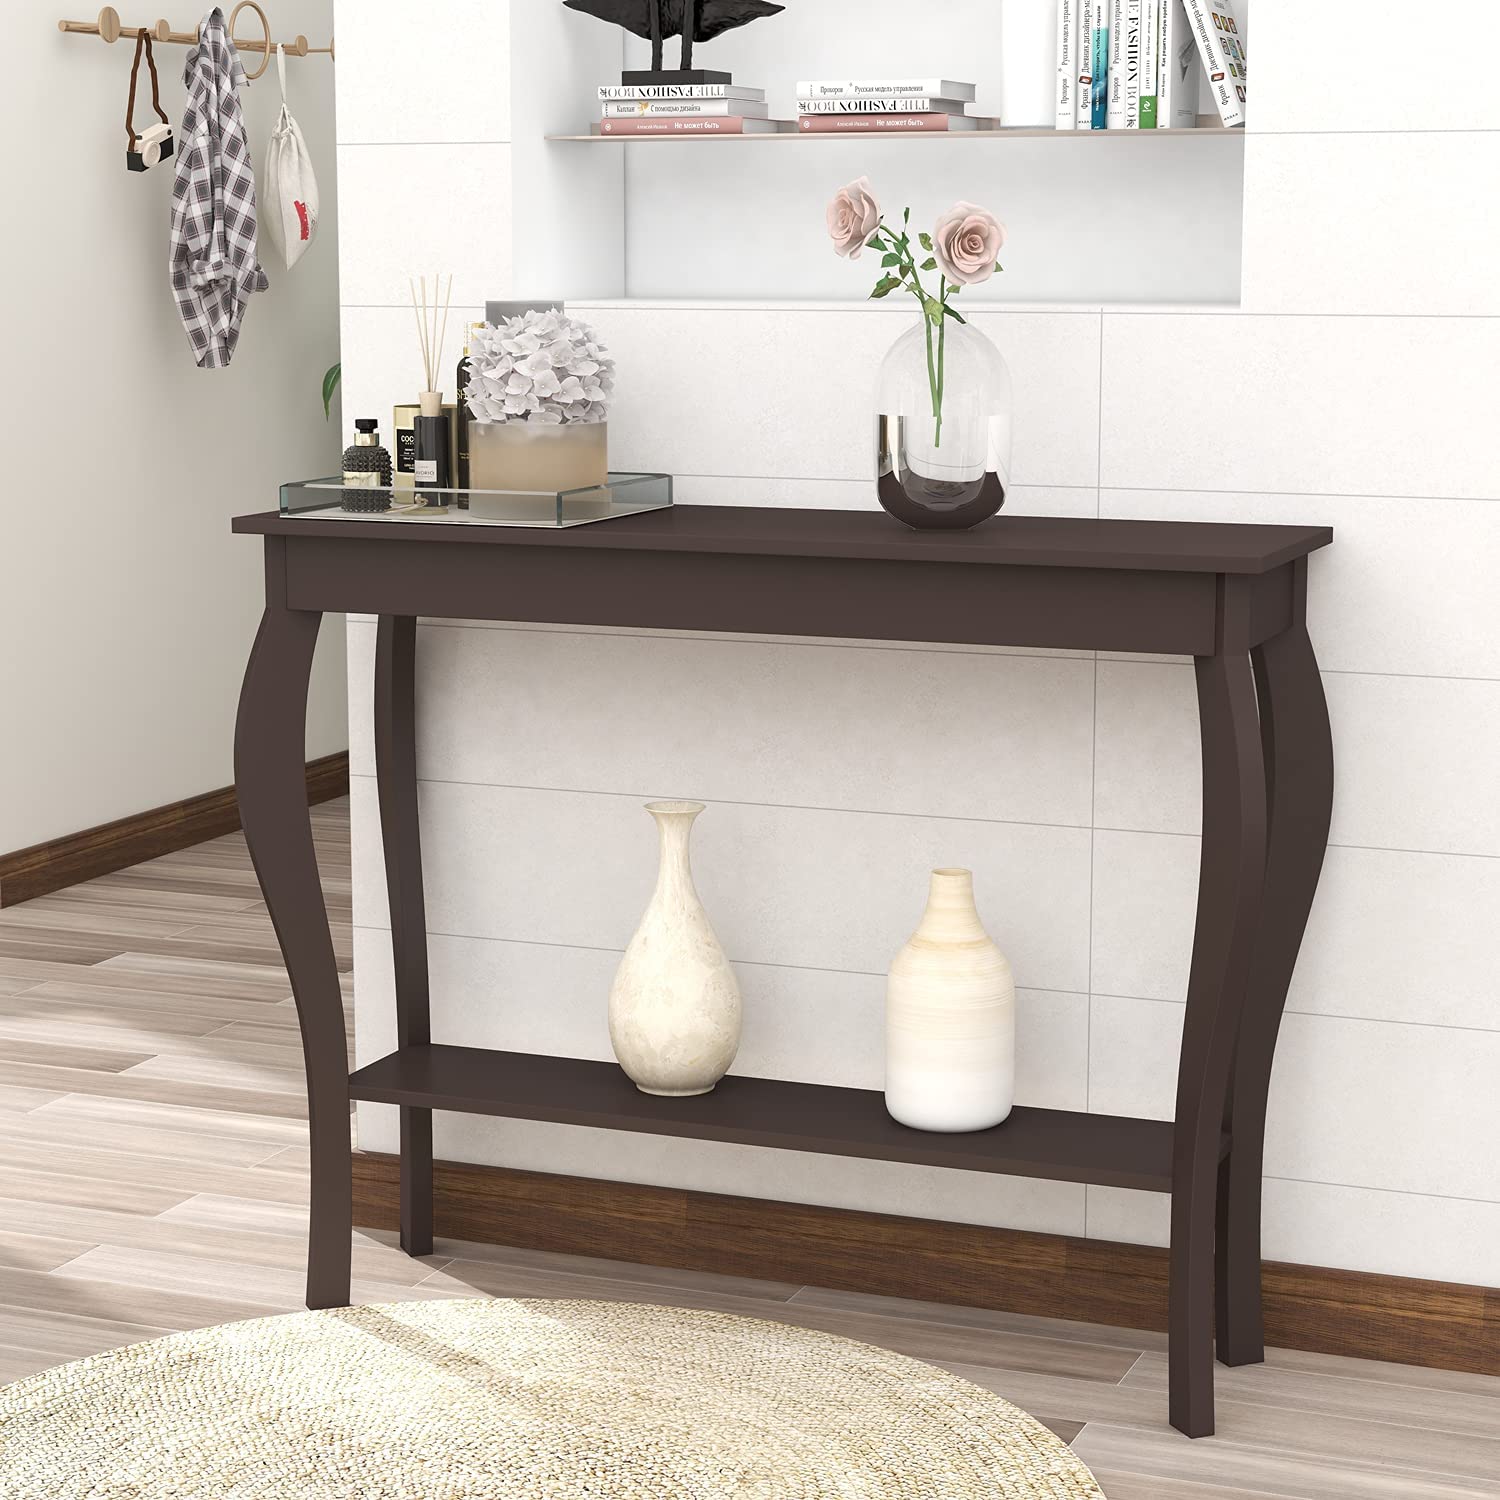 ChooChoo Curved Leg Easy Assemble Console Table For Entryway